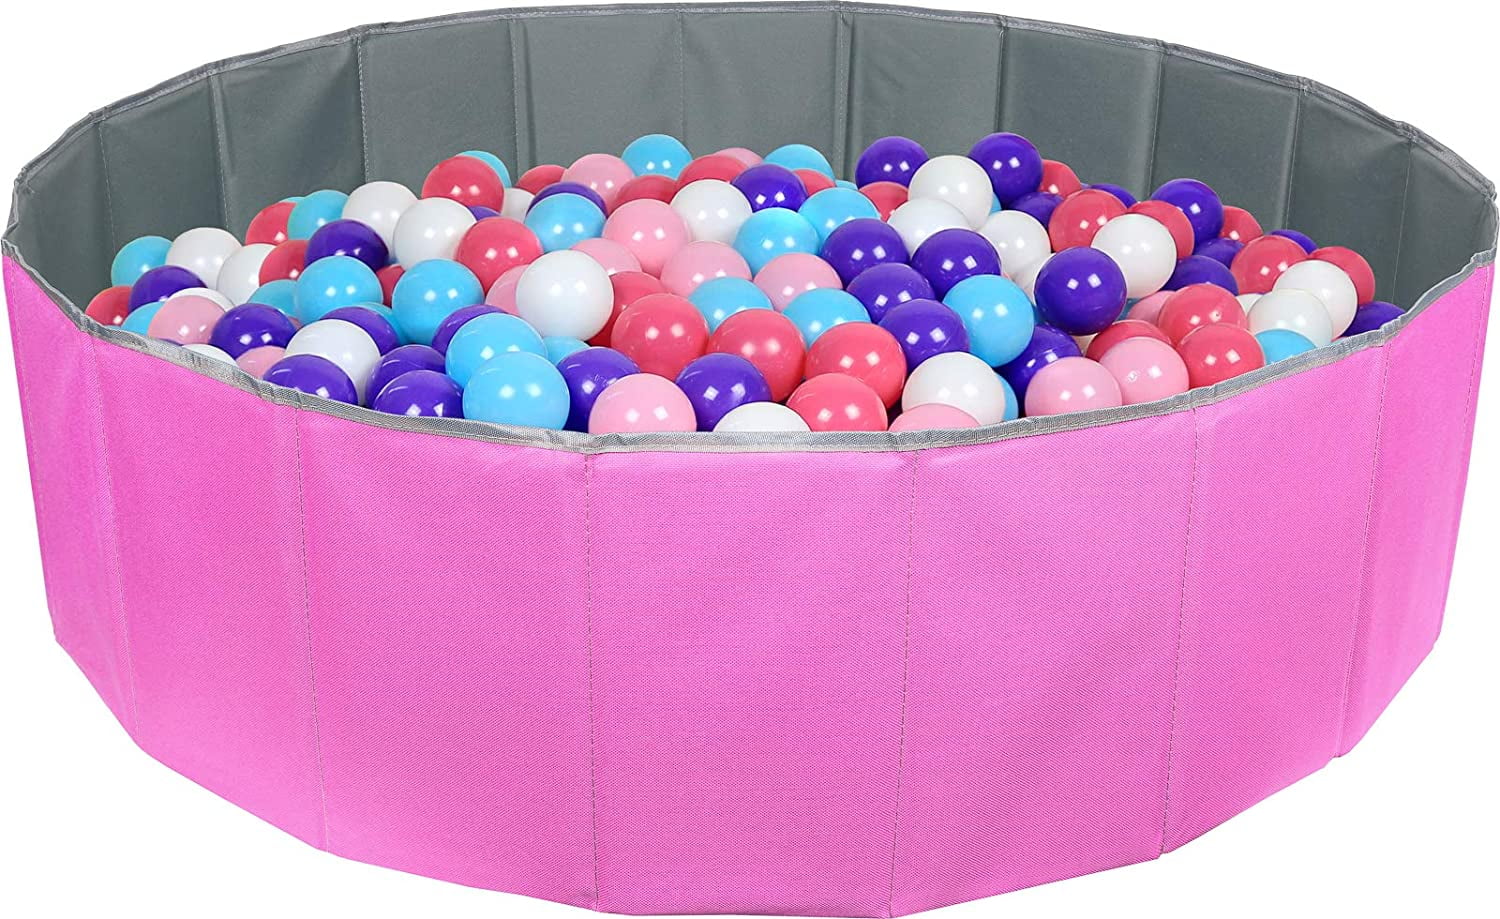 Soft Baby Foam Ball Pit Pool Round New and soft play balls Child Kid Play Game T 